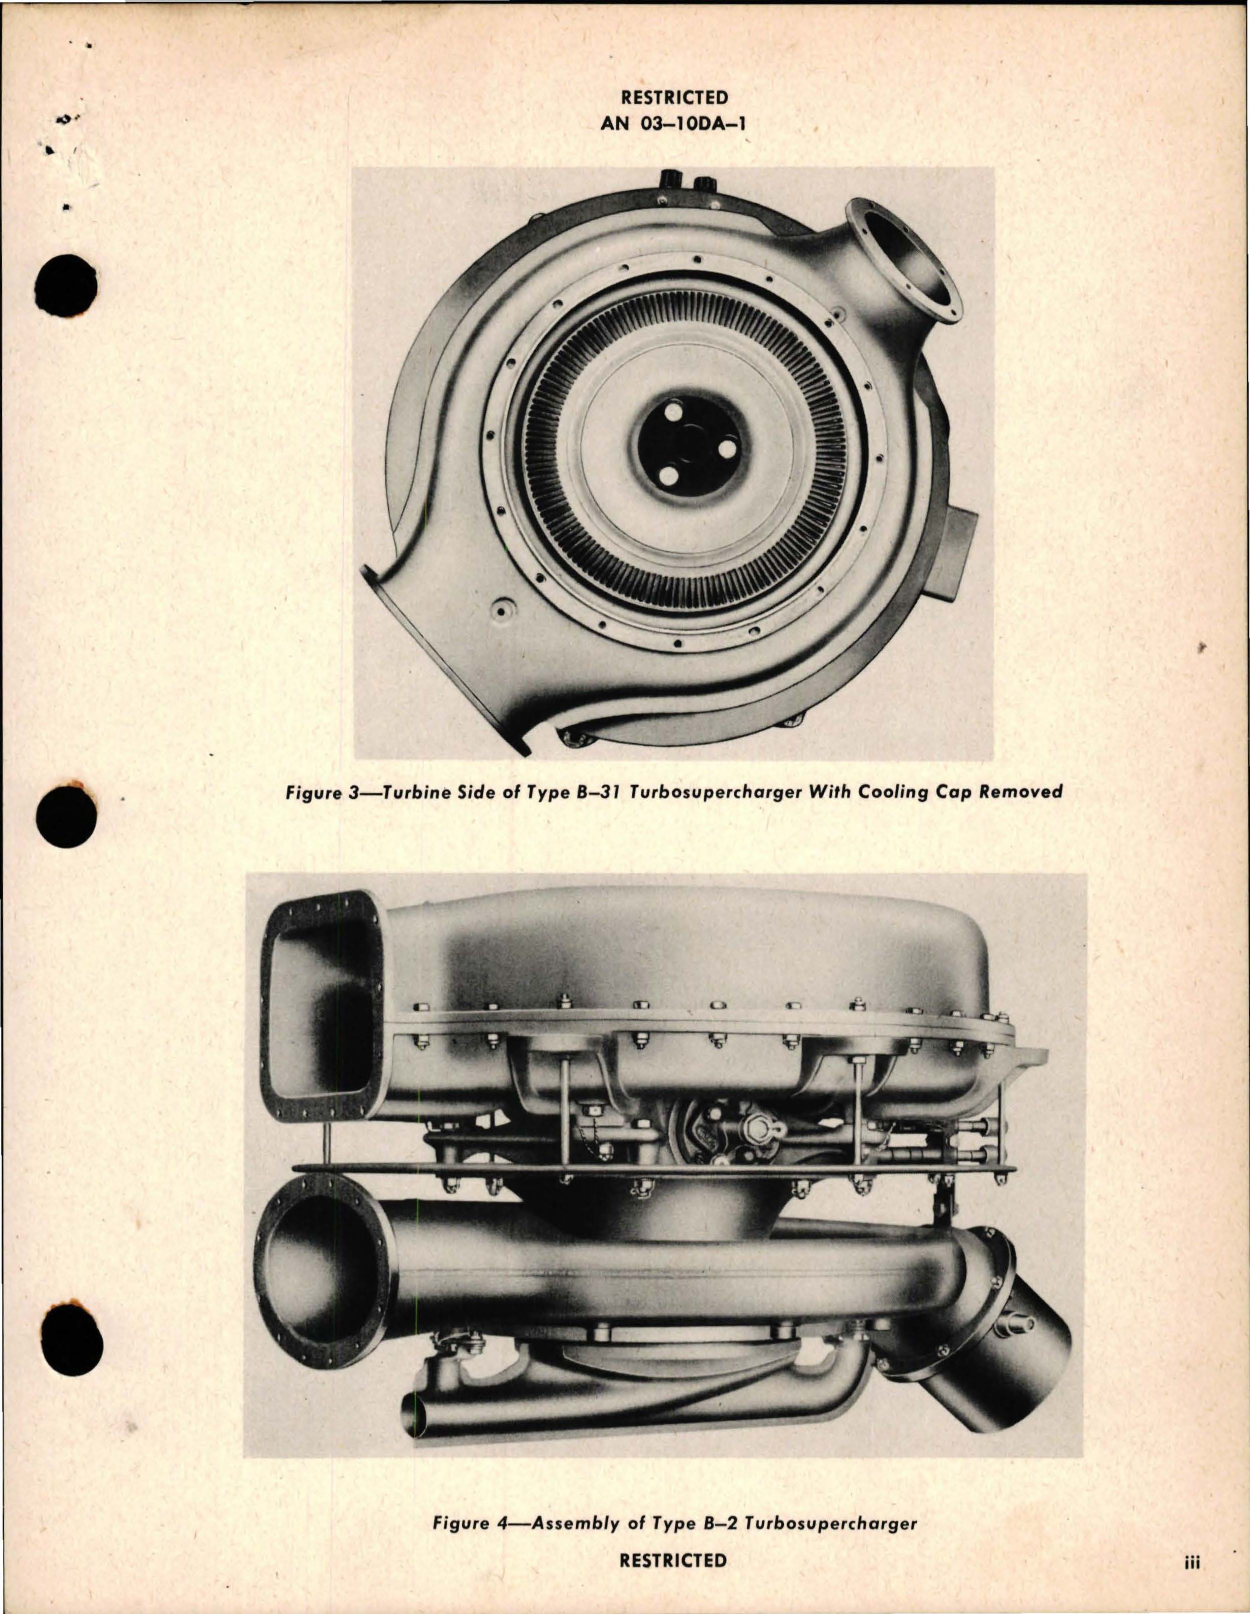 Sample page 5 from AirCorps Library document: Operation, Service and Overhaul Instructions with Parts Catalog for Turbosuperchargers - Types B-2, B-11, B-22, B-31, and B-33 